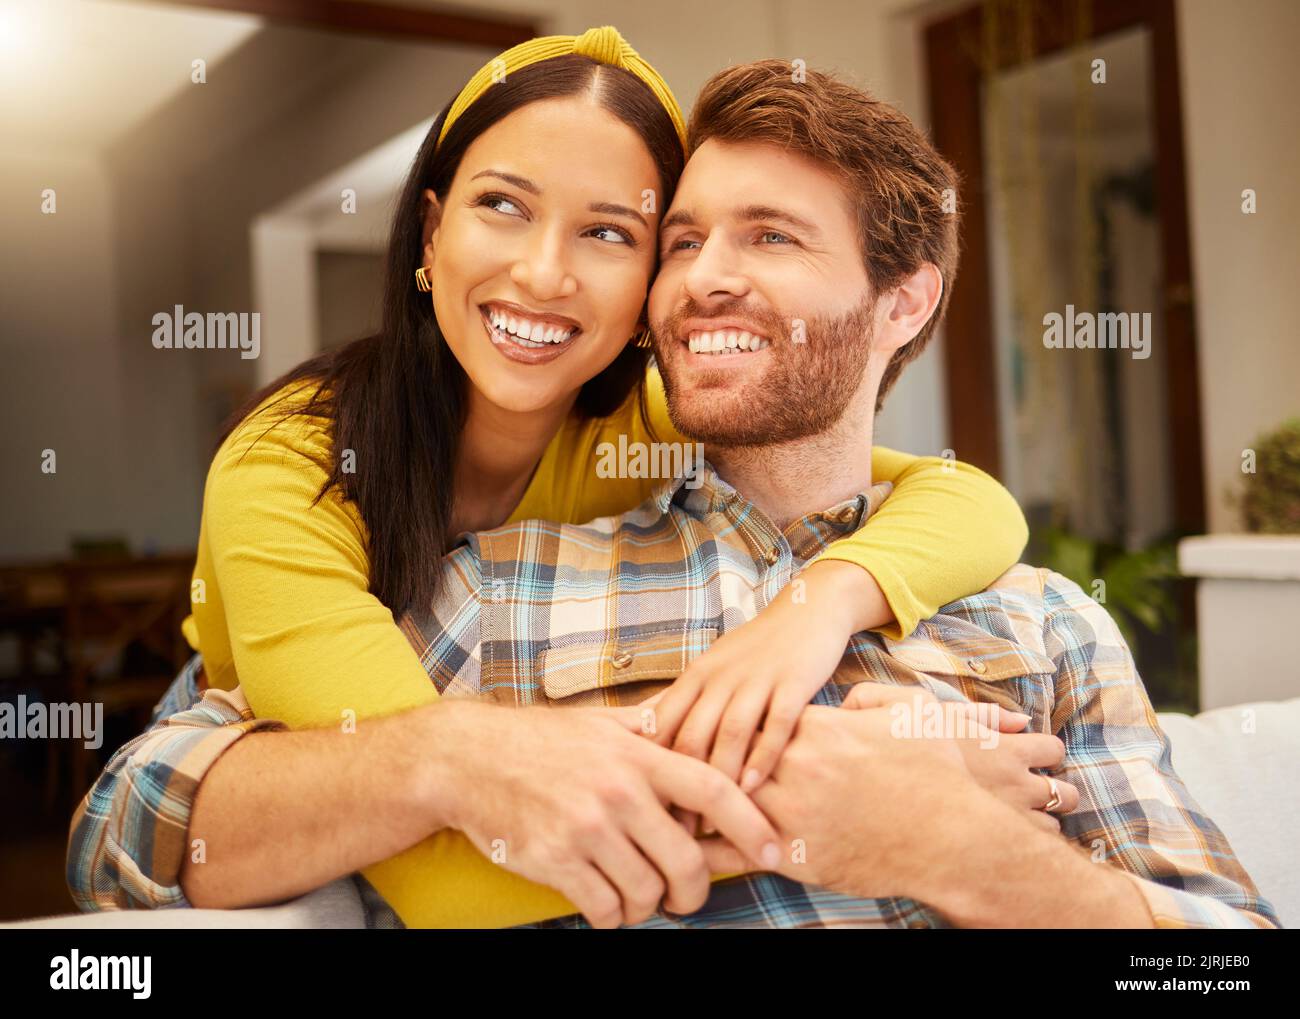 Happy and excited couple hugging thinking of future relaxing and sitting on a couch at home. Relaxed diverse interracial lovers smiling and enjoying Stock Photo